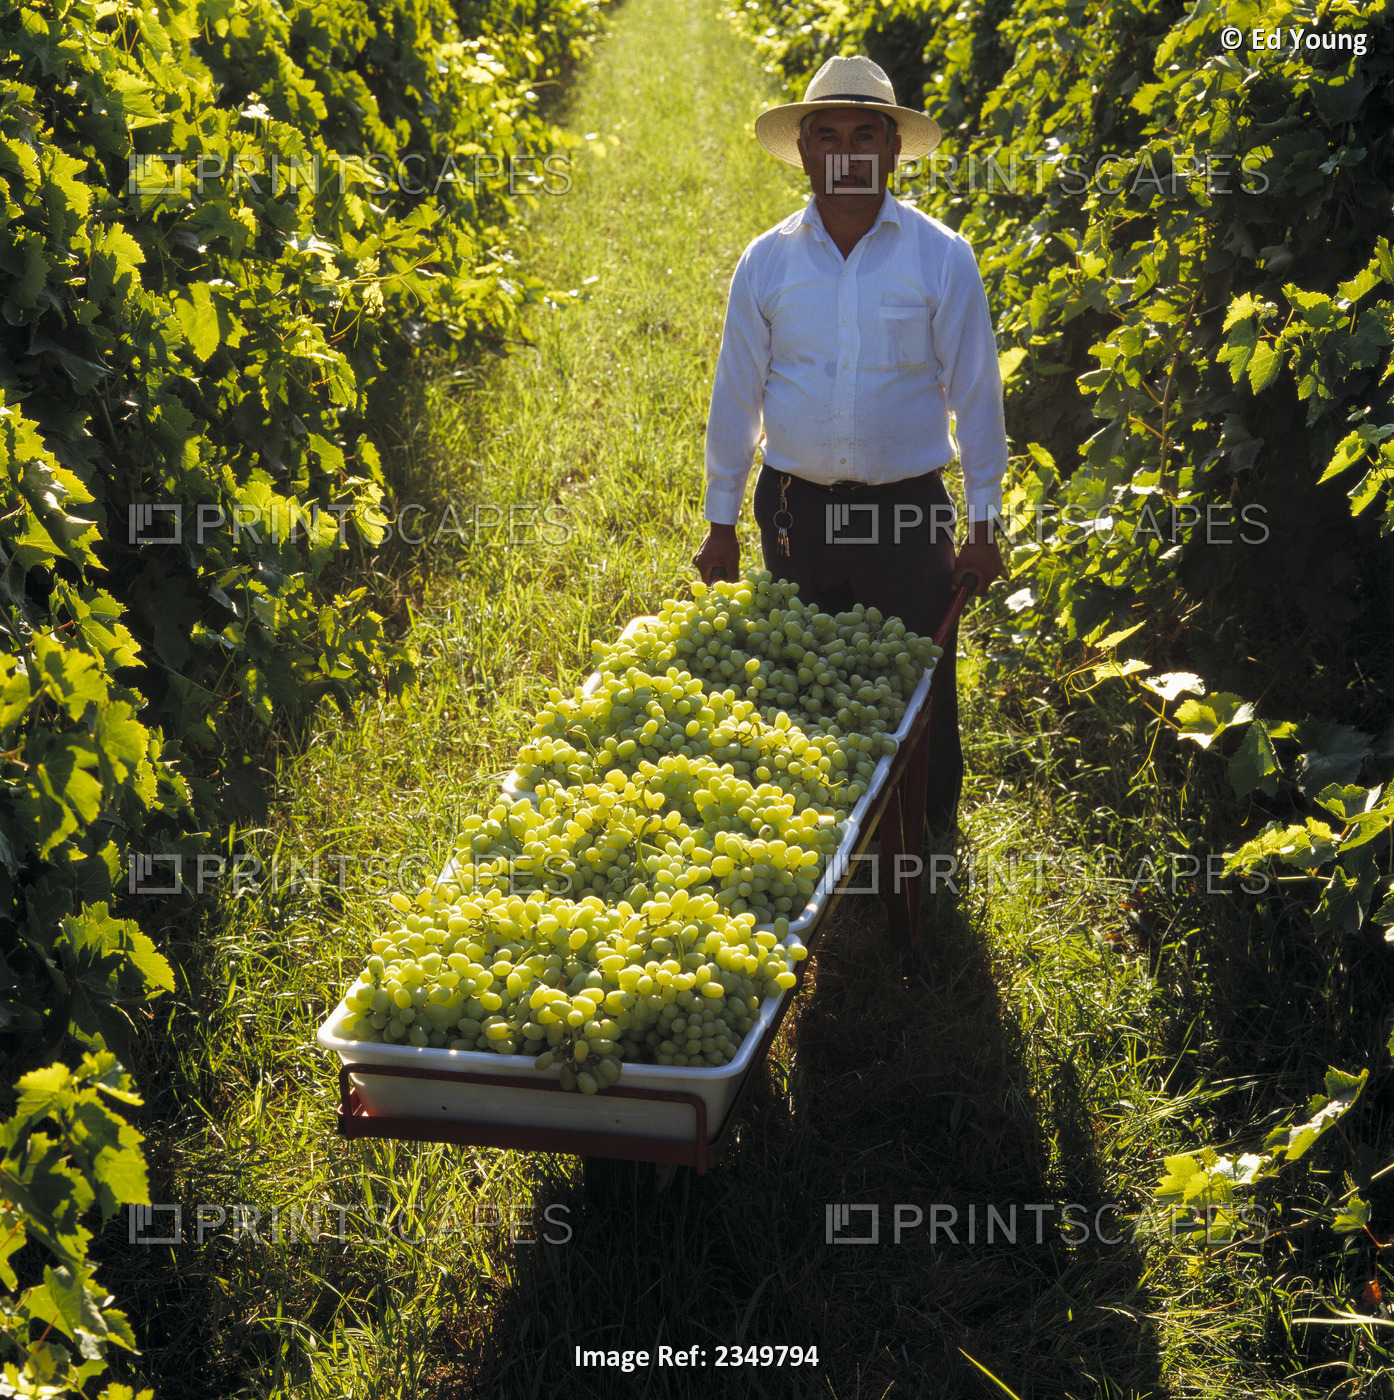 Agriculture - Field Worker With A Cart Of Harvested Thompson Seedless Grapes In ...